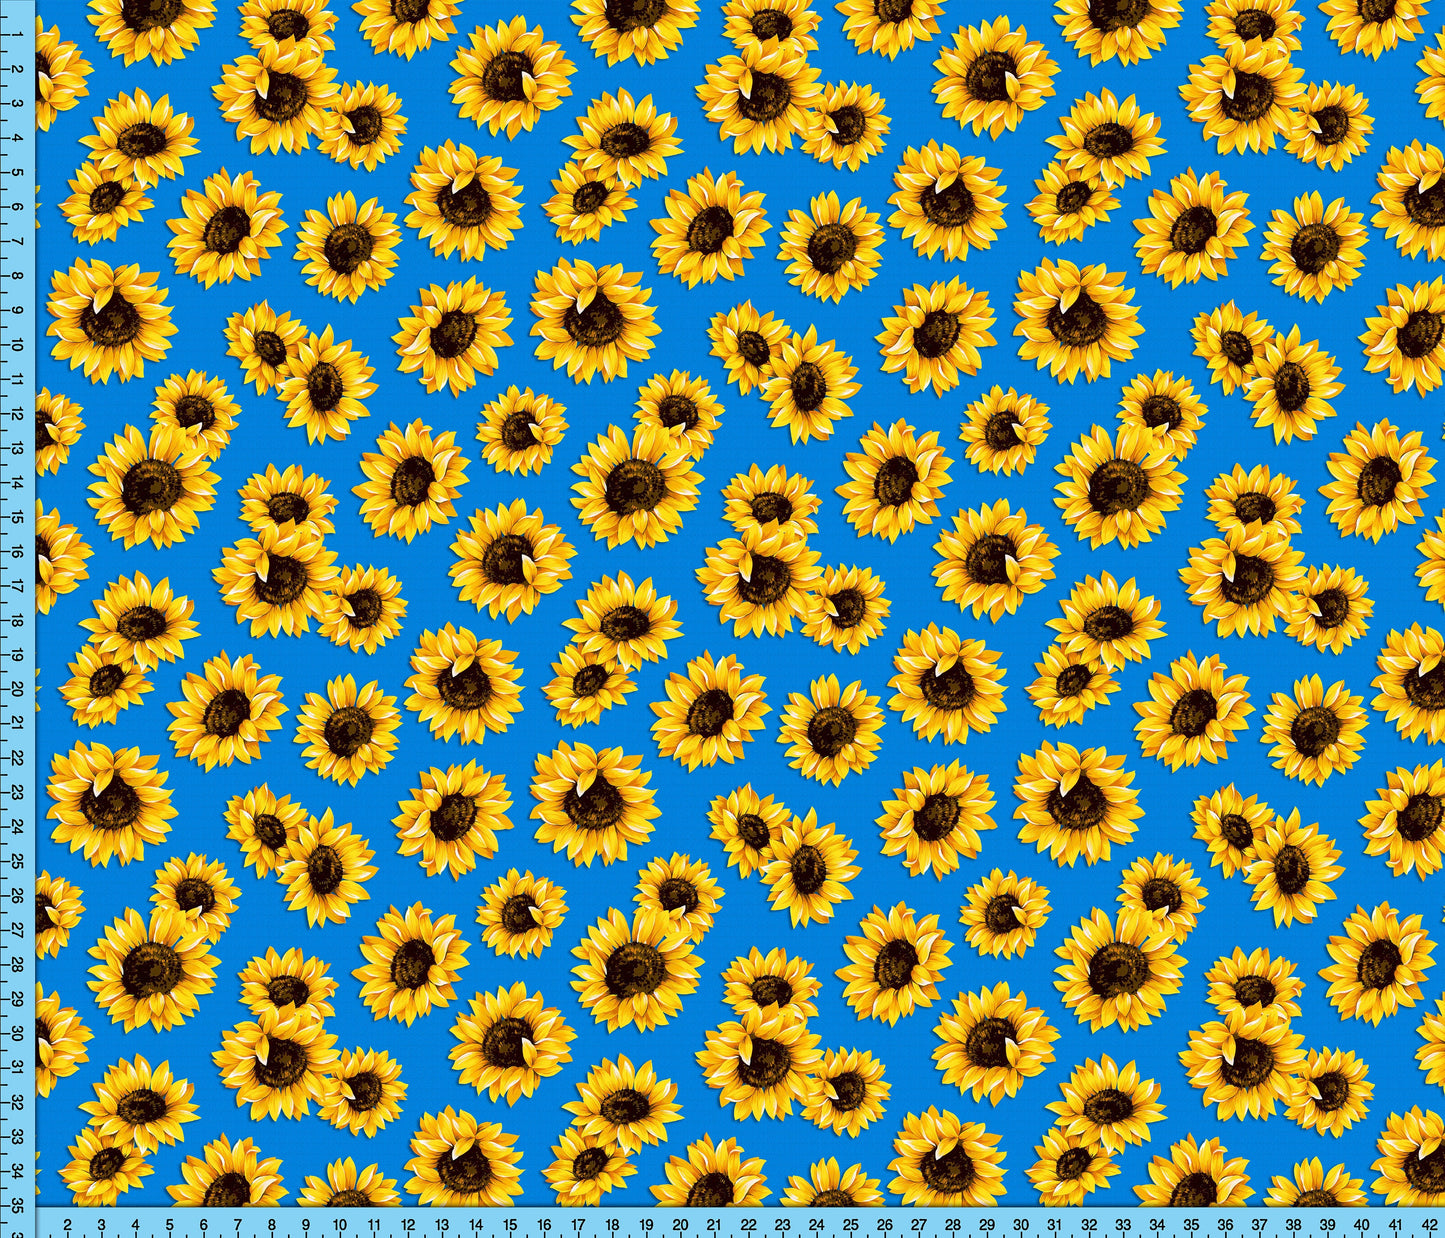 Sunflower Fabric on Blue Background, Printed By the Yard on your choice of fabrics